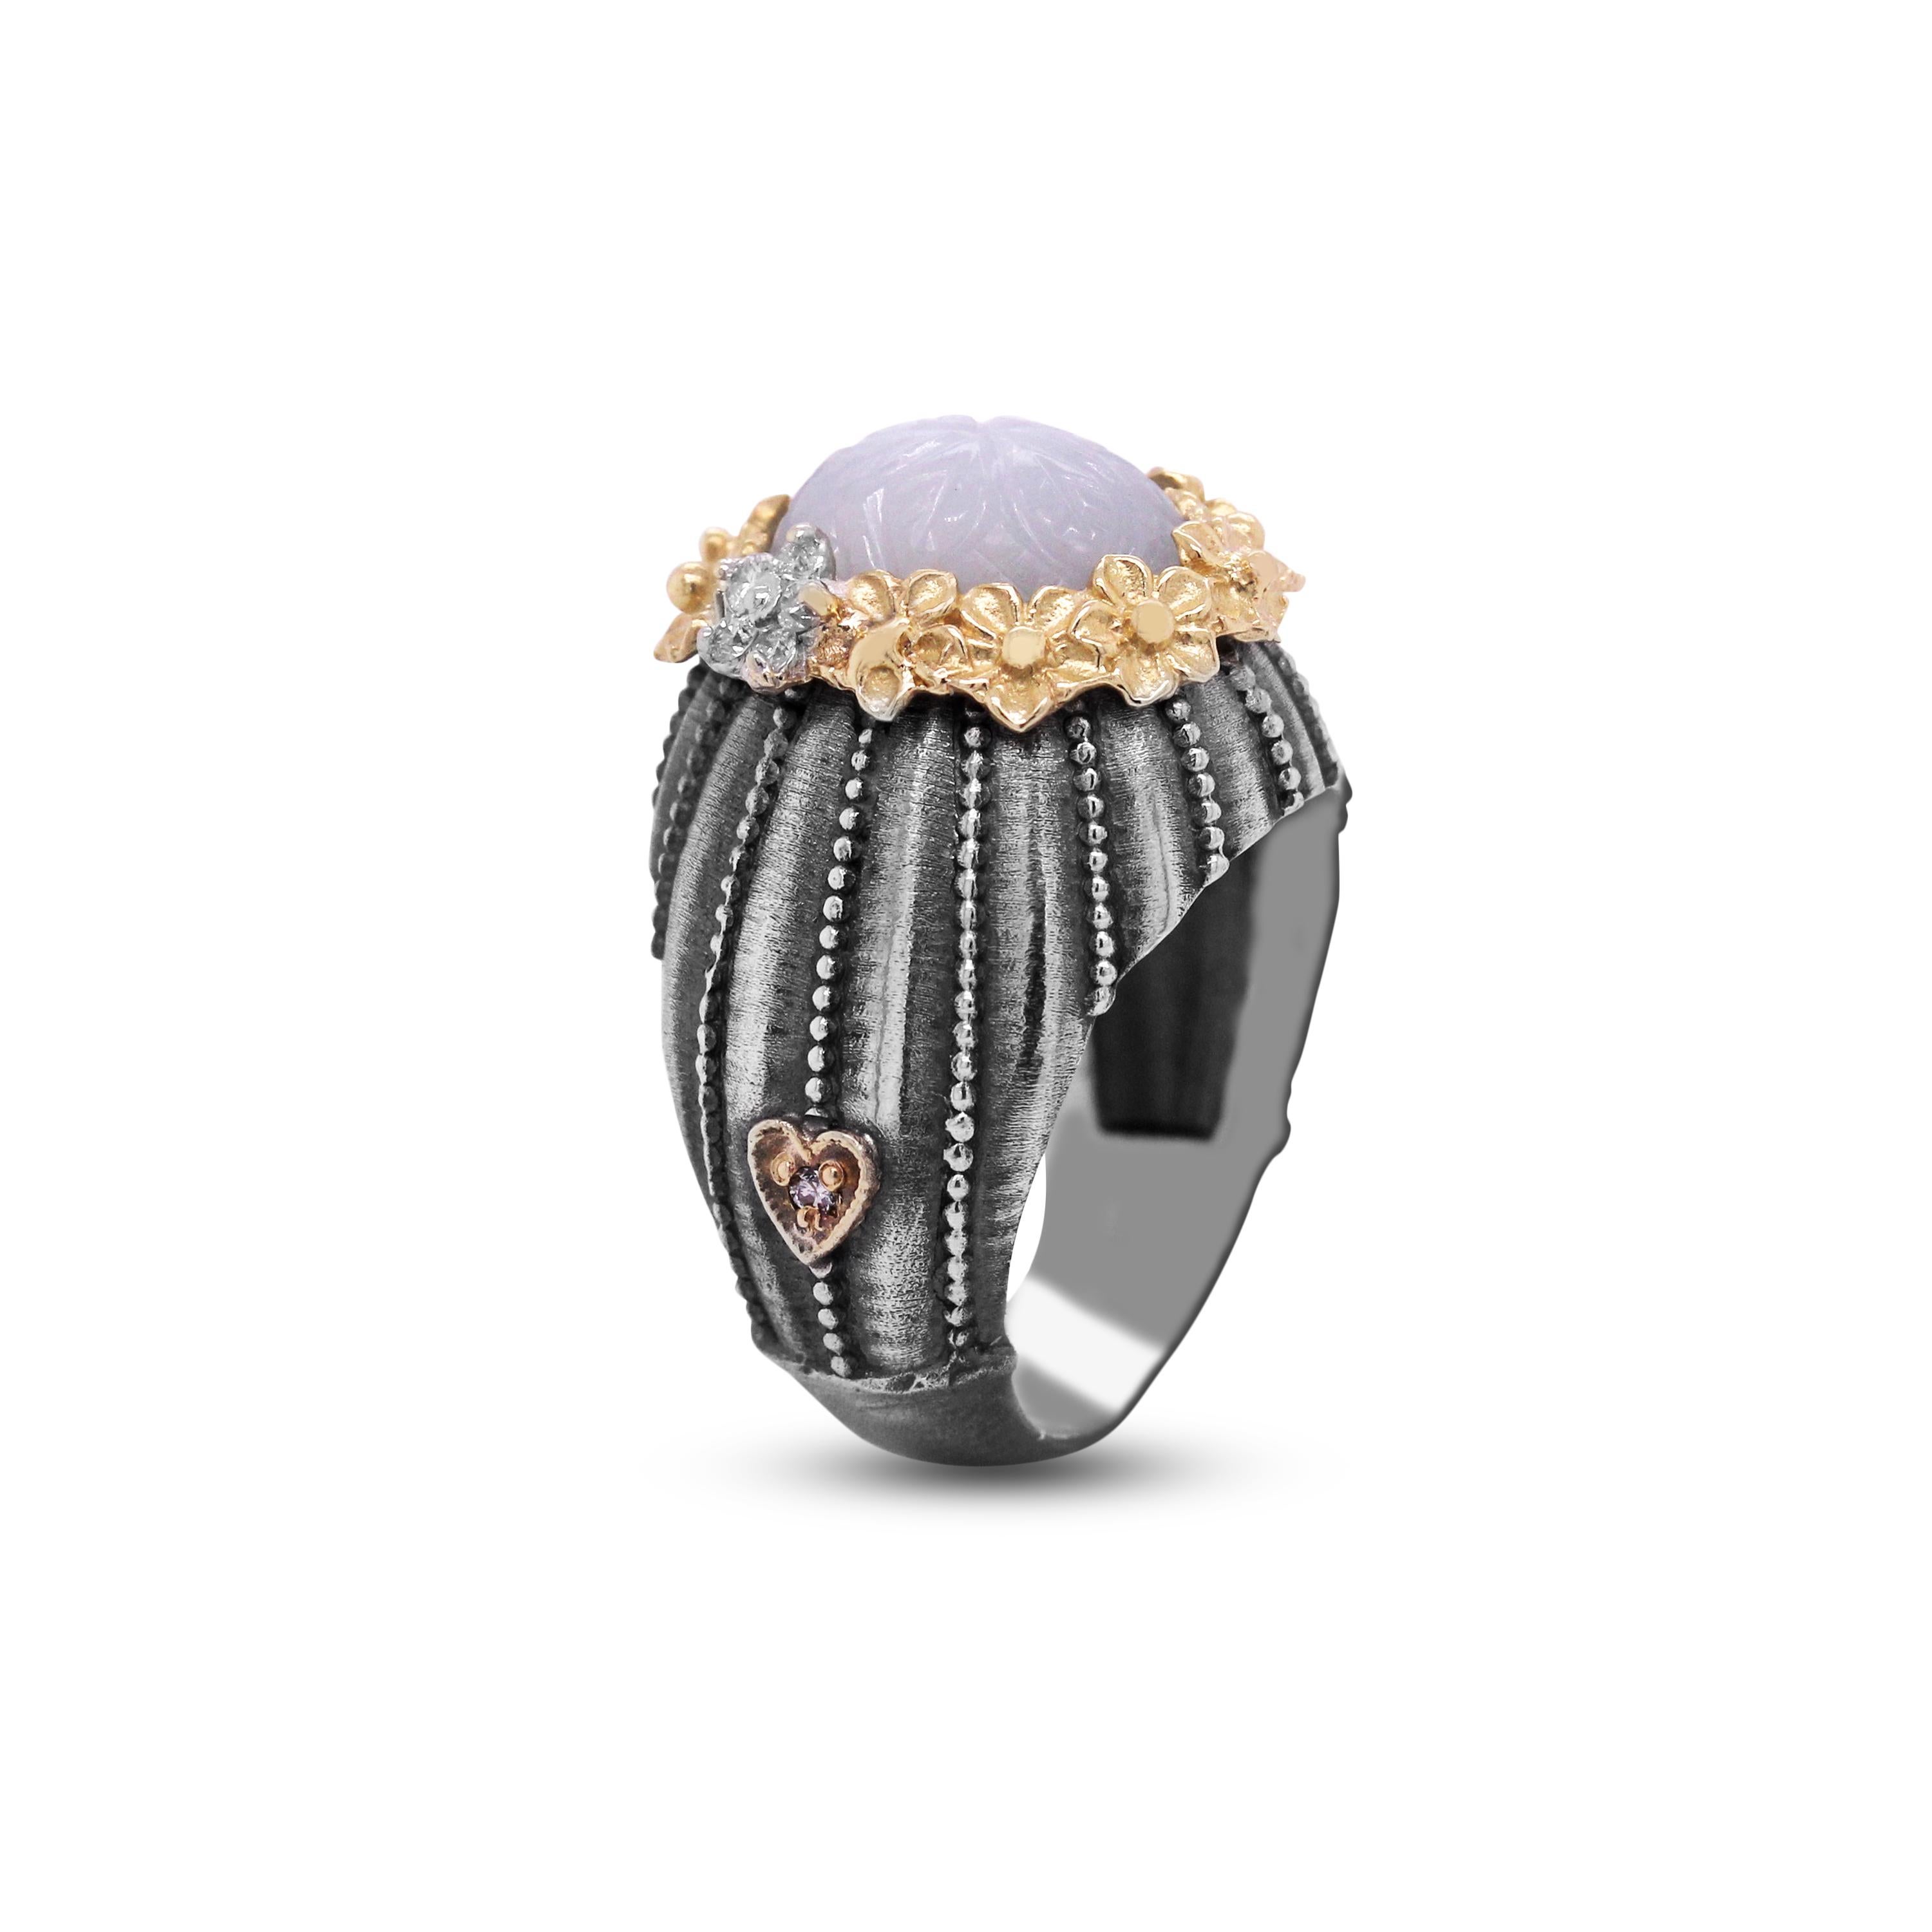 Aged Sterling Silver & 18K Gold Floral Ring with Flower Carved Grey Moonstone center and Diamonds by Stambolian

This ring from the Stambolian 